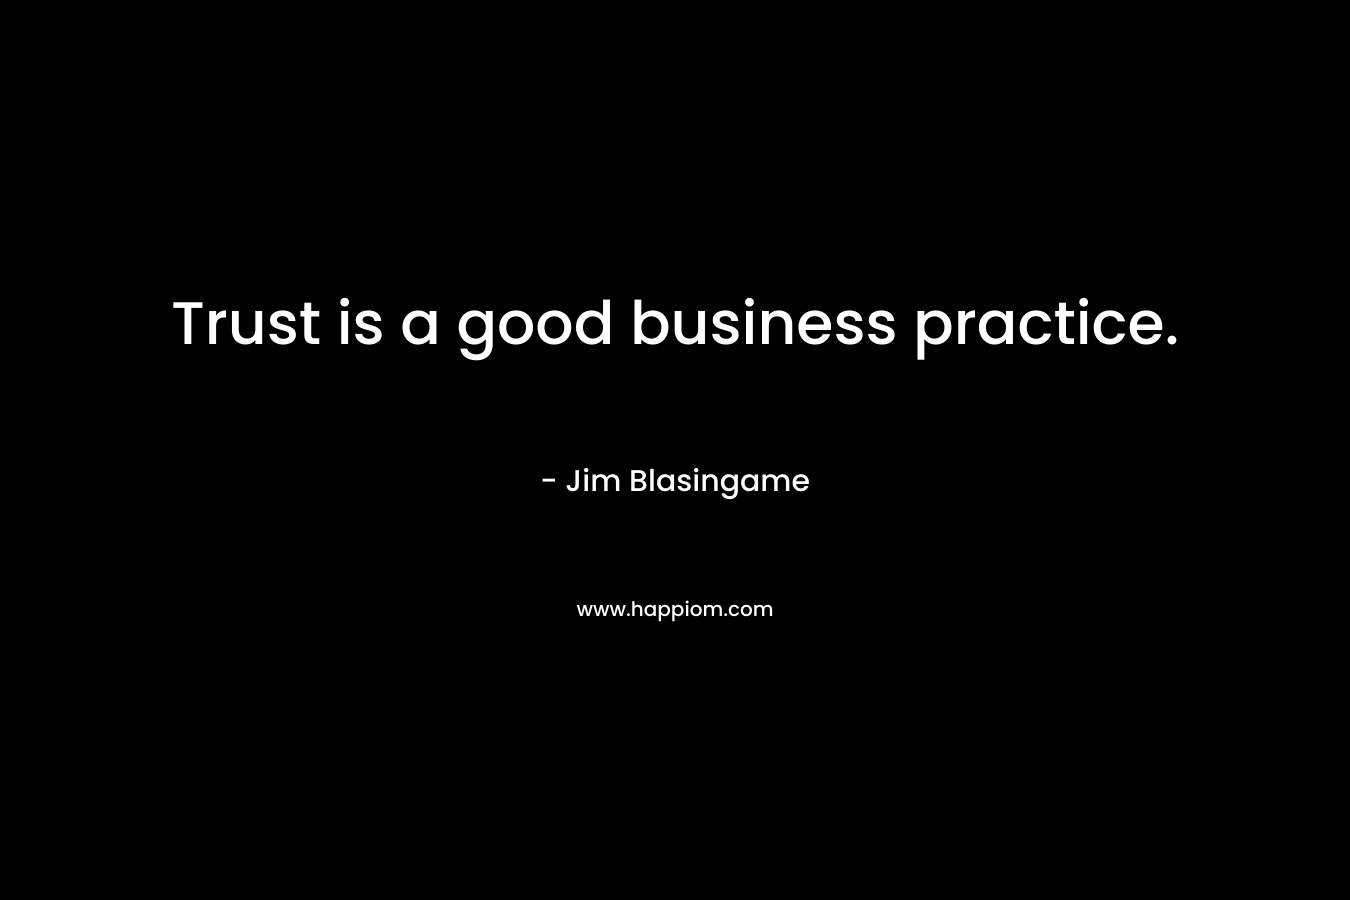 Trust is a good business practice.